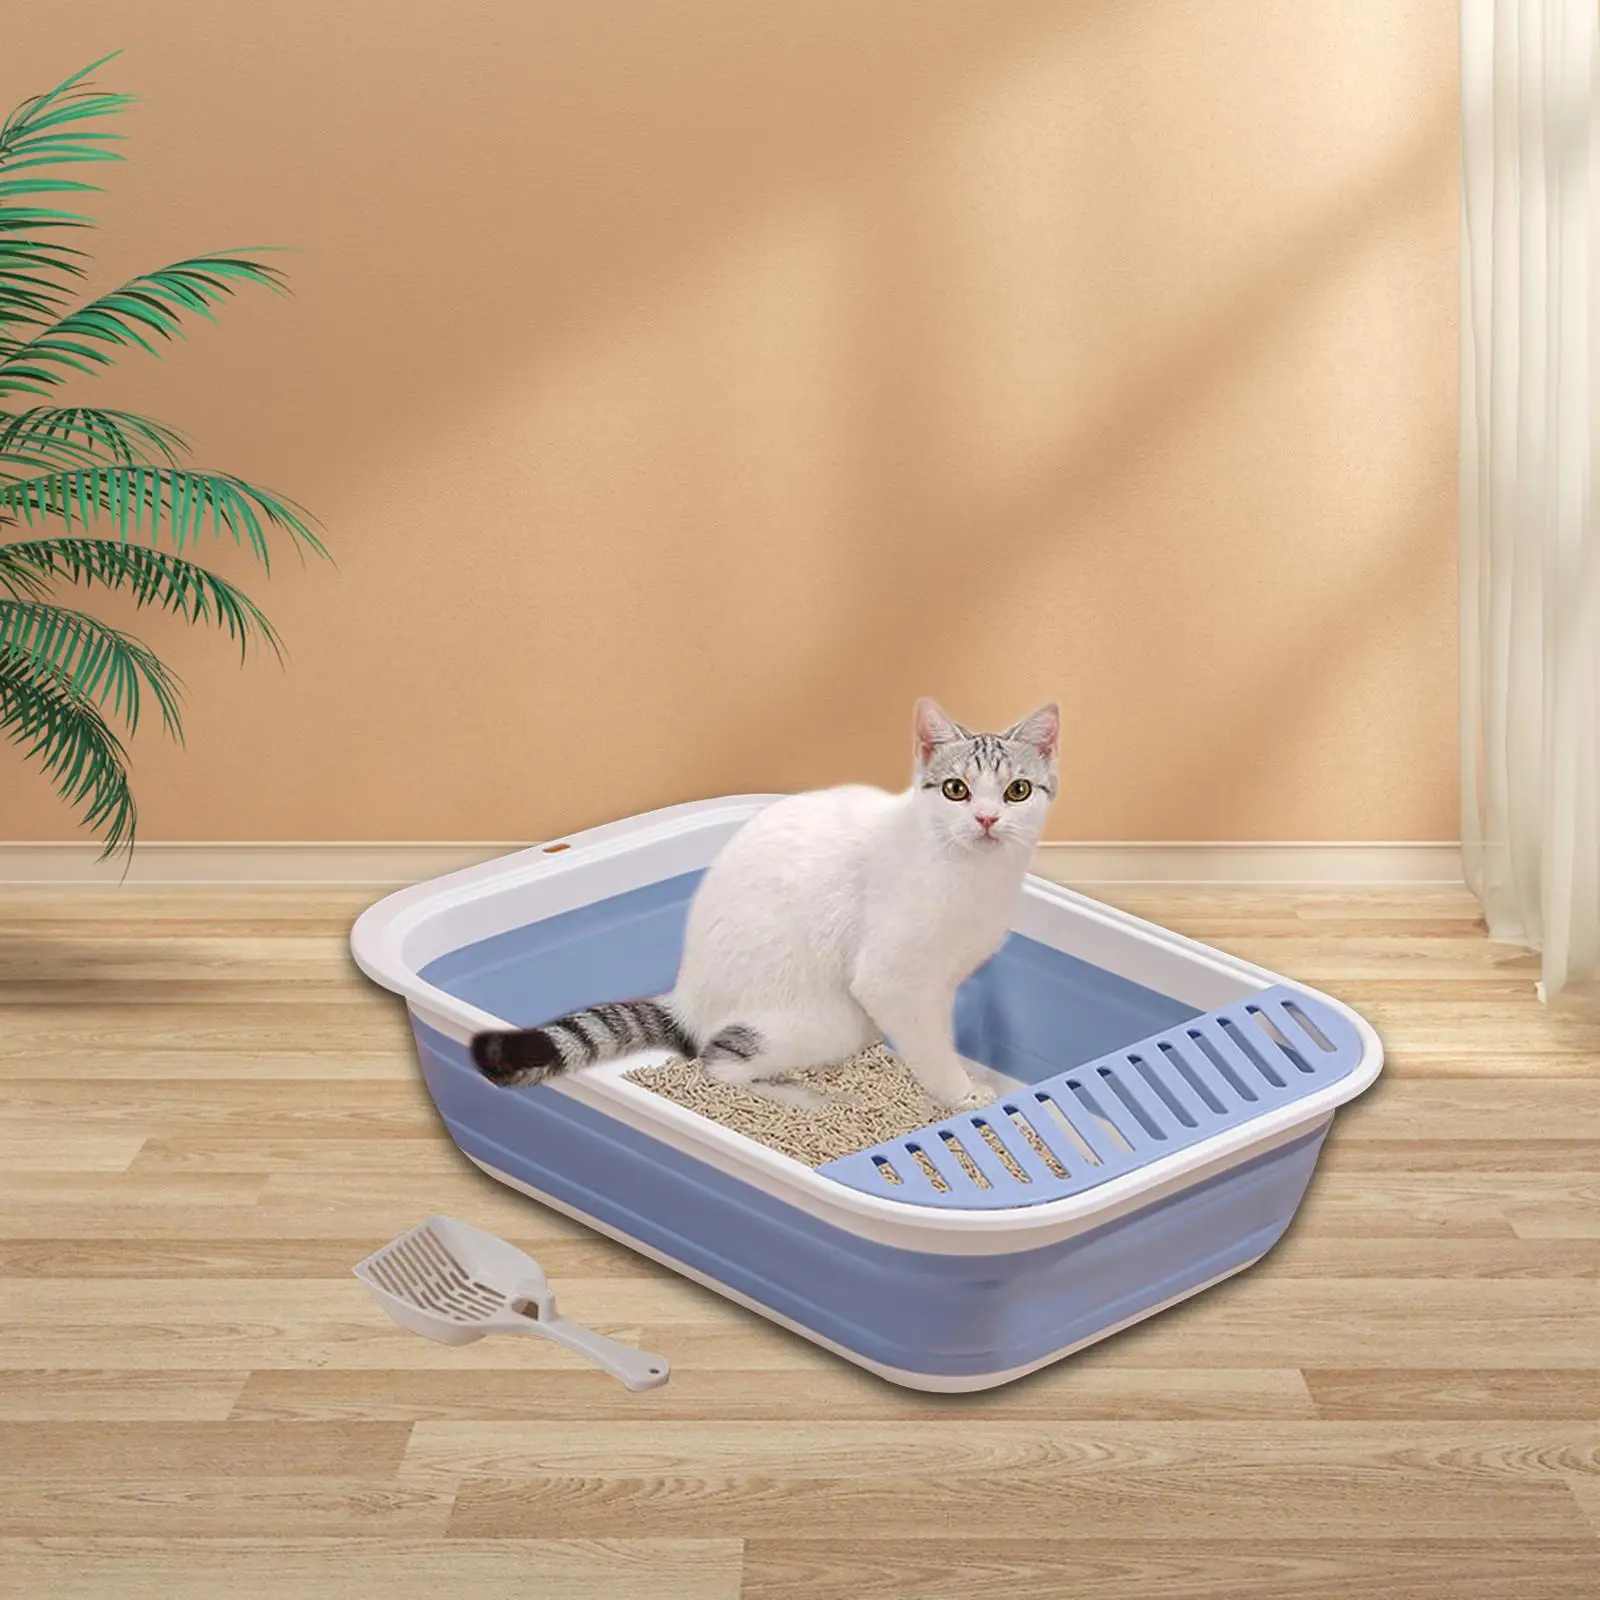 Cat Litter Box Folding Cat Sandbox Pet Litter Tray for Rabbit All Kinds of Cat Litter Small Animals Easy to Clean, No Odor